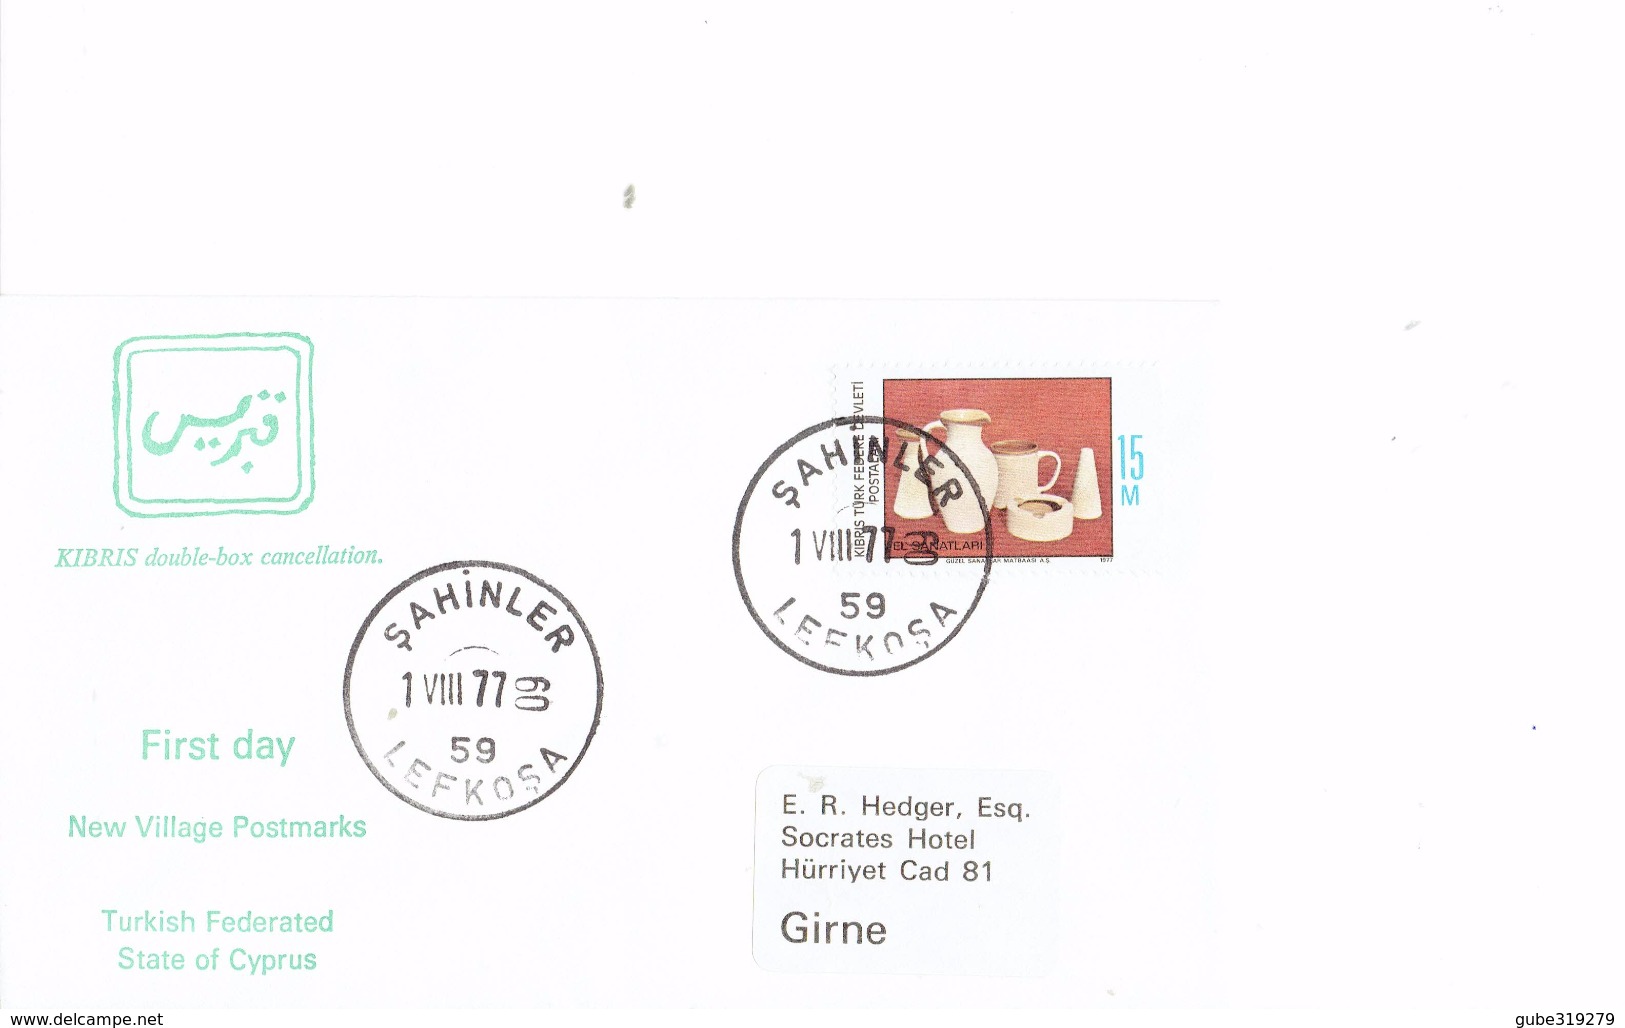 CYPRUS 1977 - FDC NEW VILLAGE POSTMARKS - KIBRIS DOUBLE CANCELLATION SERADKOY LEFKOSA AUG 1 1977- 1 STAMP 15 M - Covers & Documents